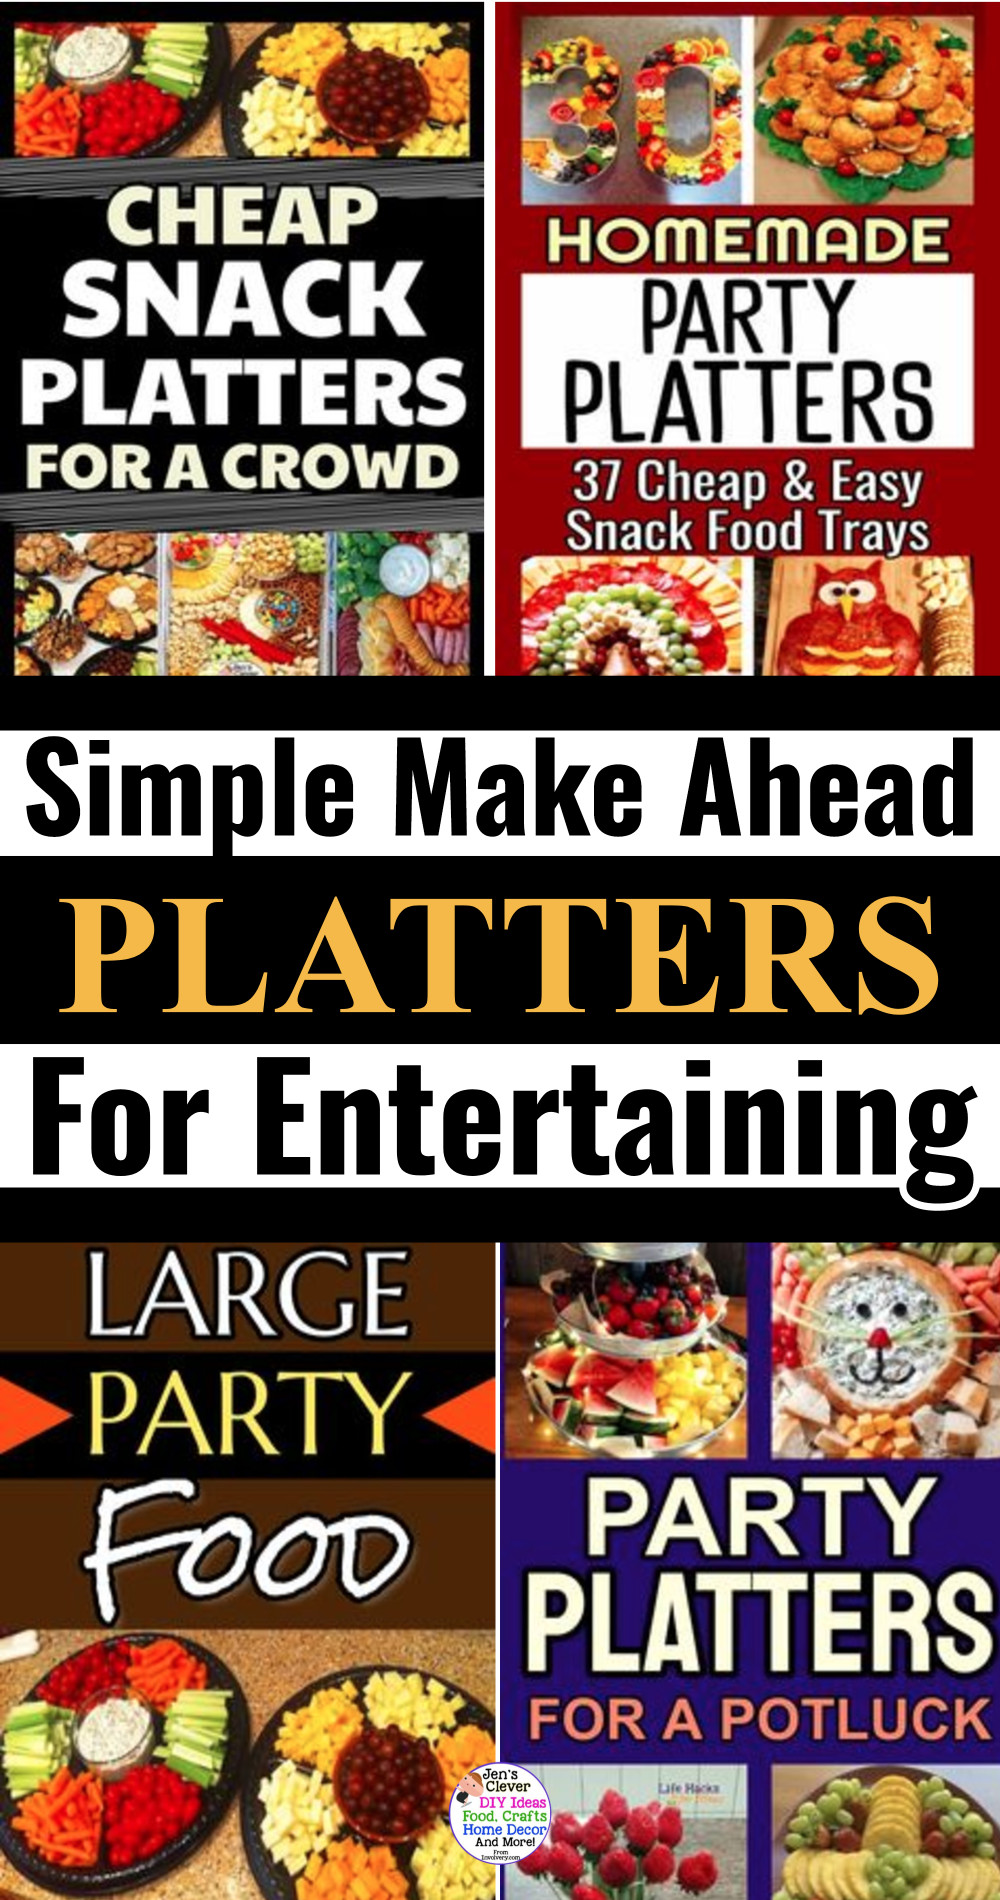 Food platters for entertaining